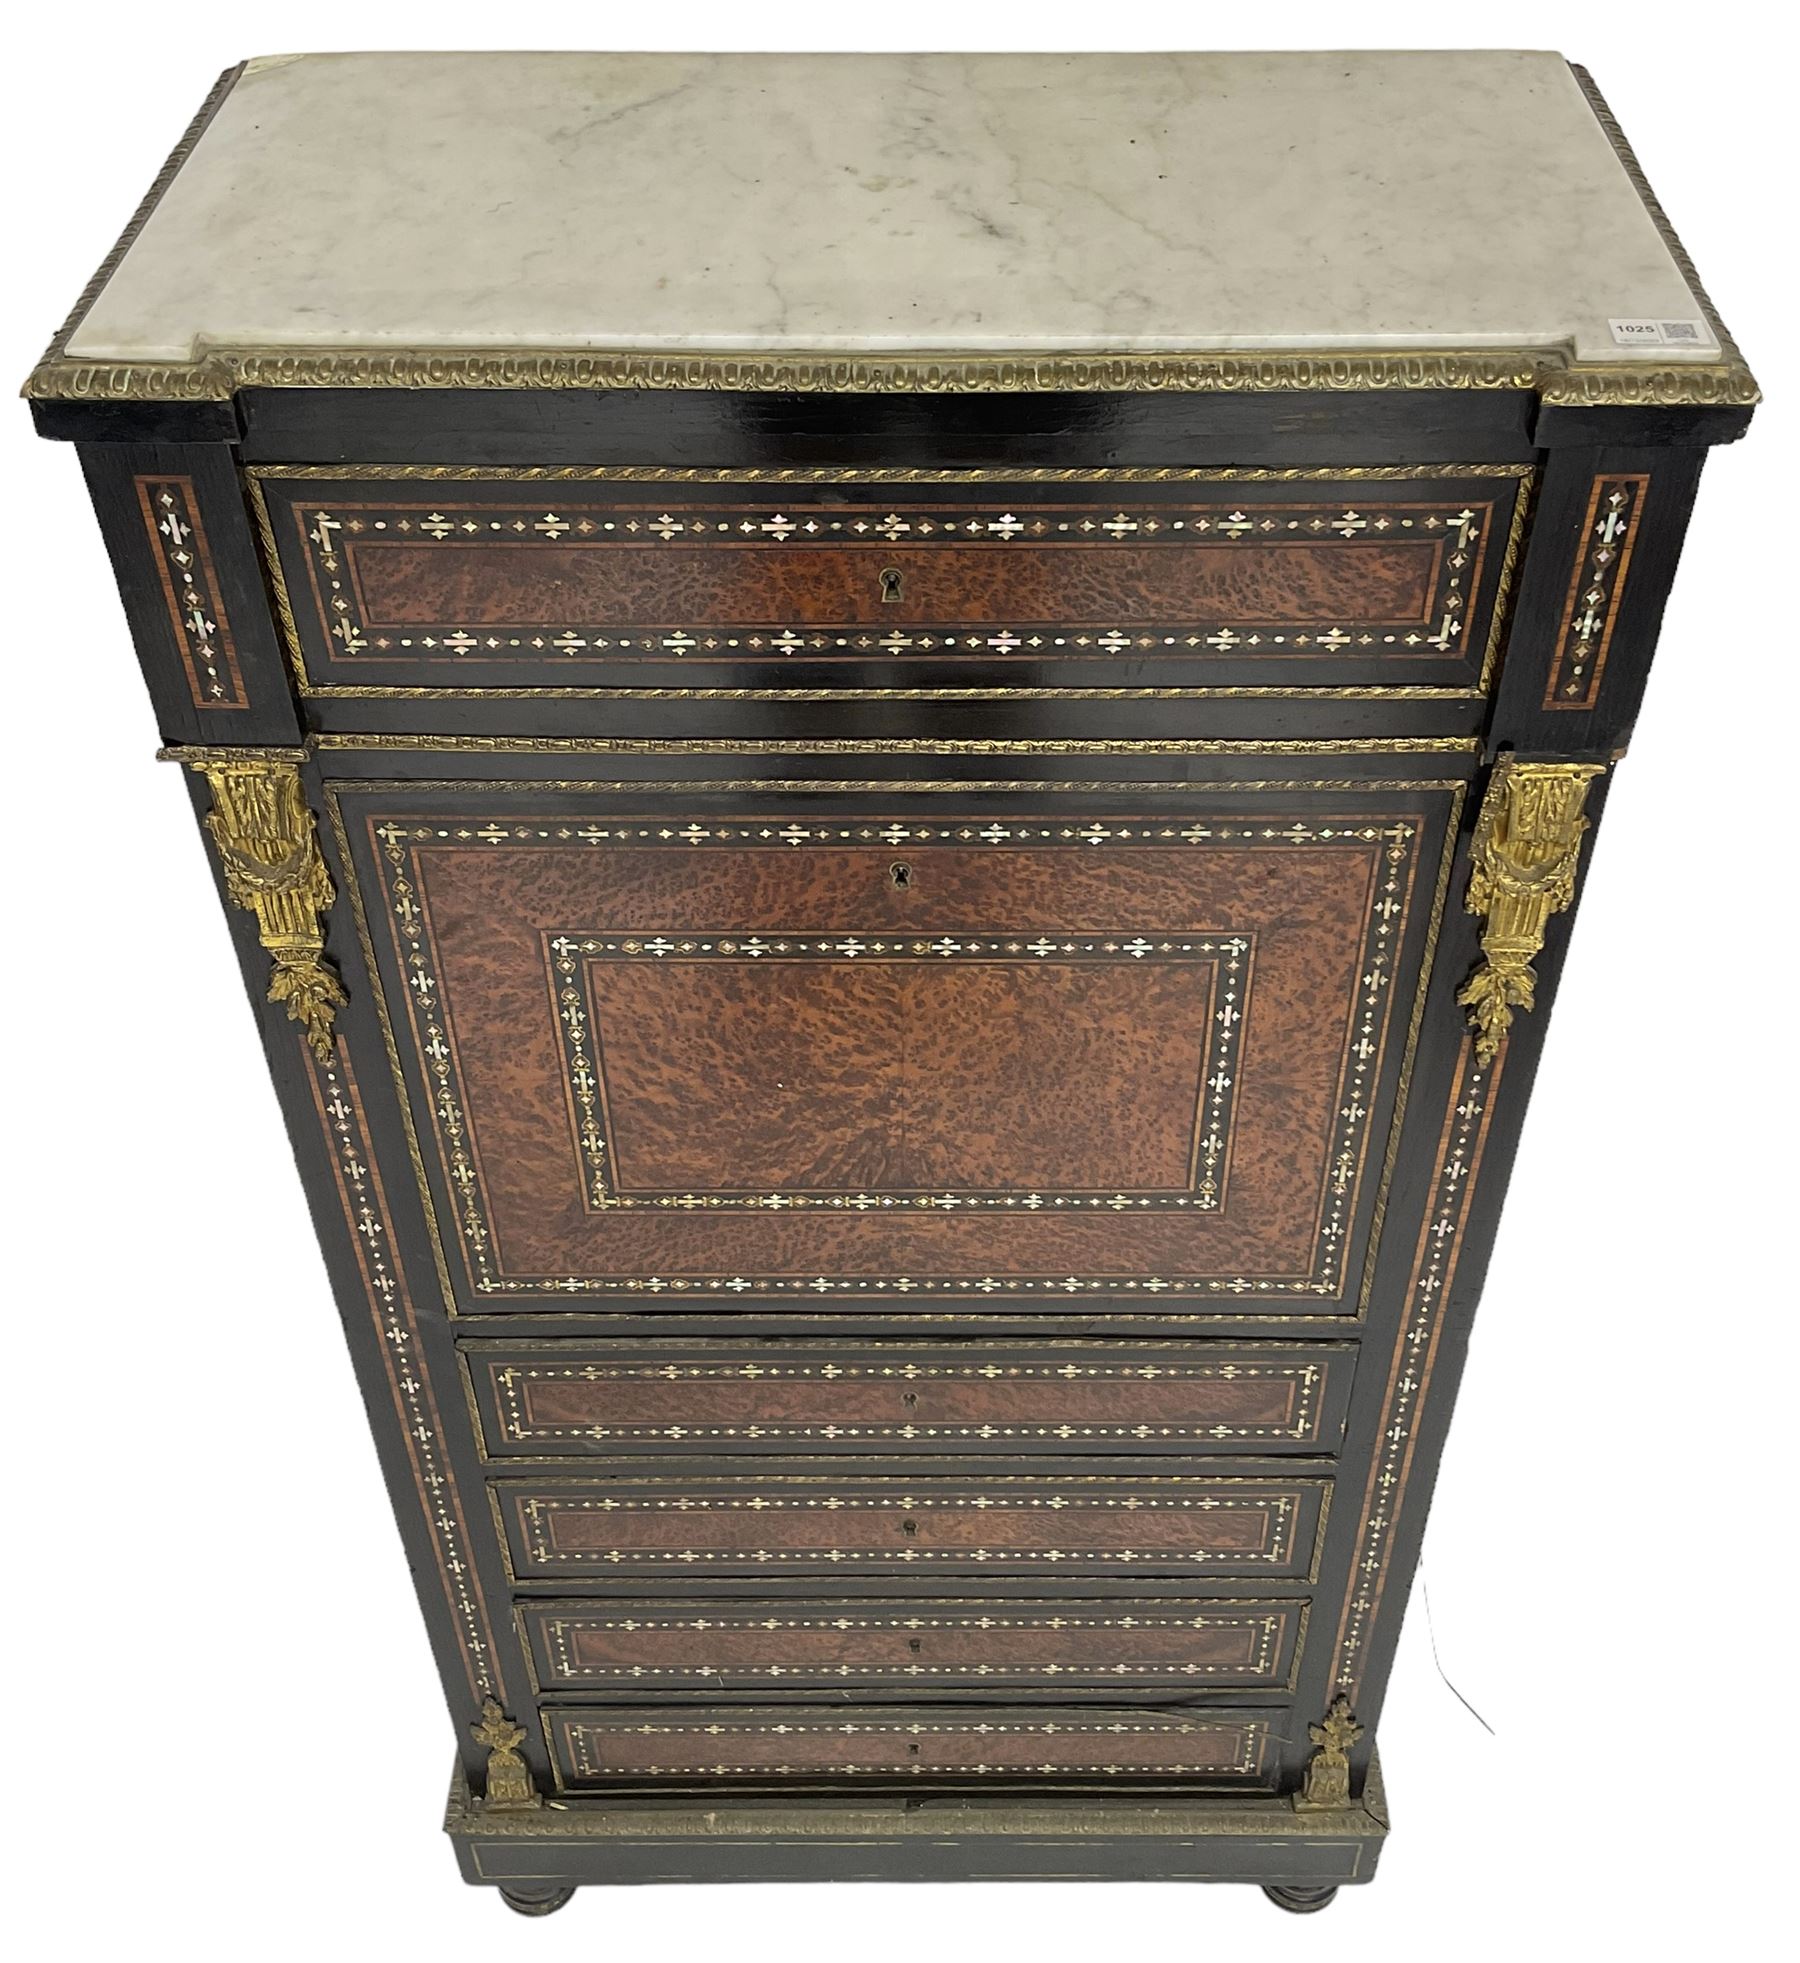 Late 19th century French ebonised and amboyna secrétaire à abattant - Image 8 of 8